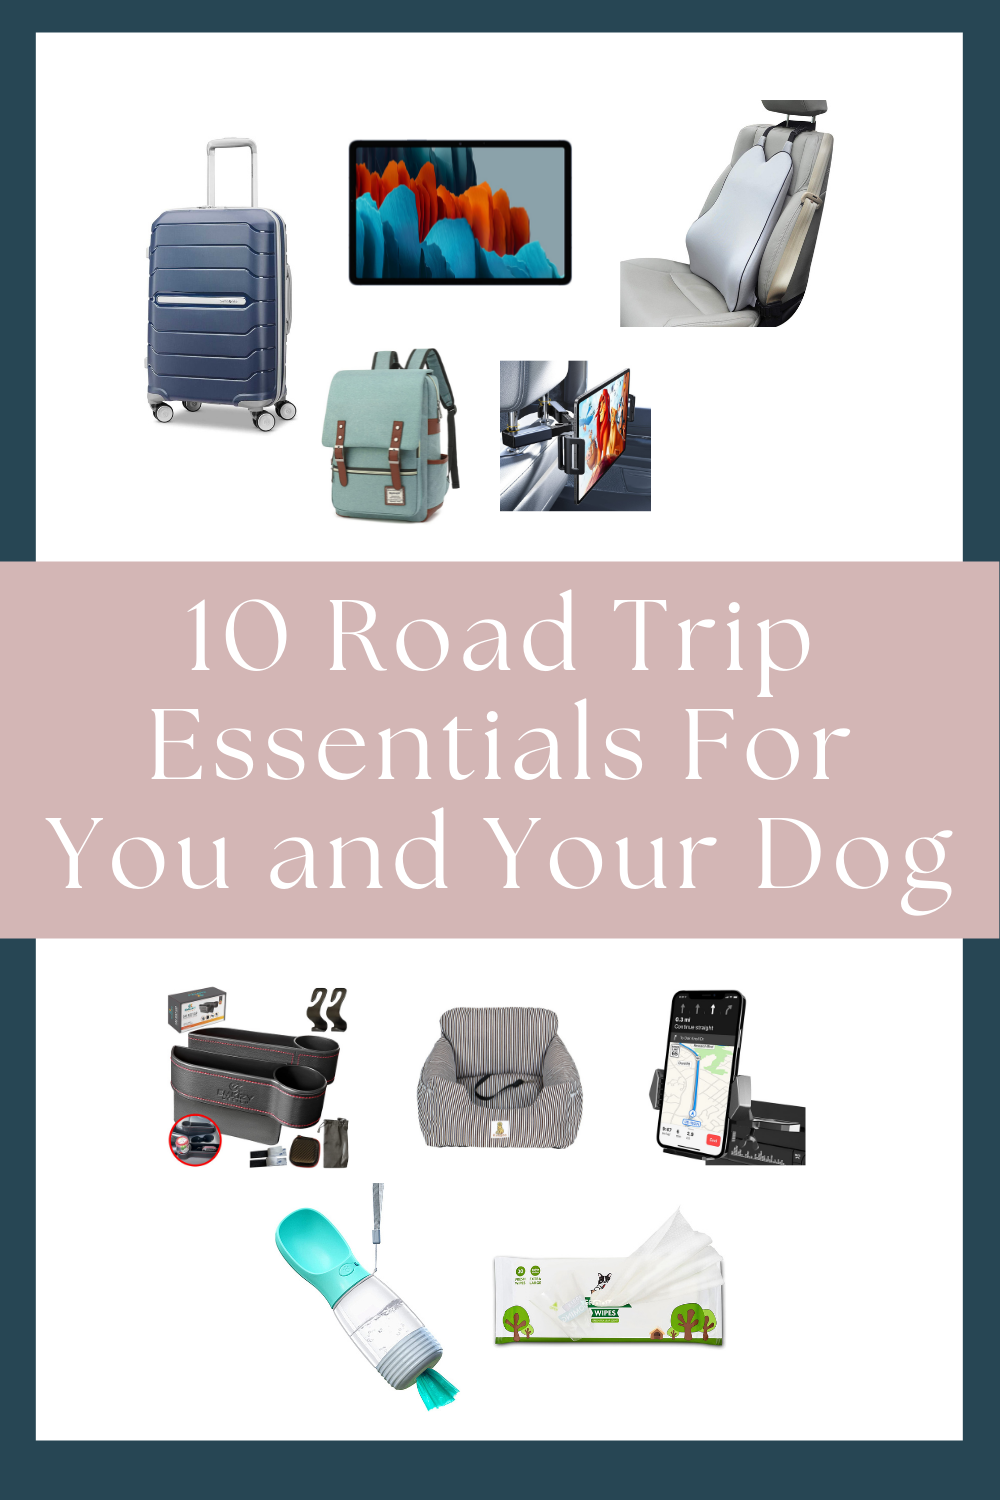 10 Road Trip Essentials For You And Your Dog - My Next Pin